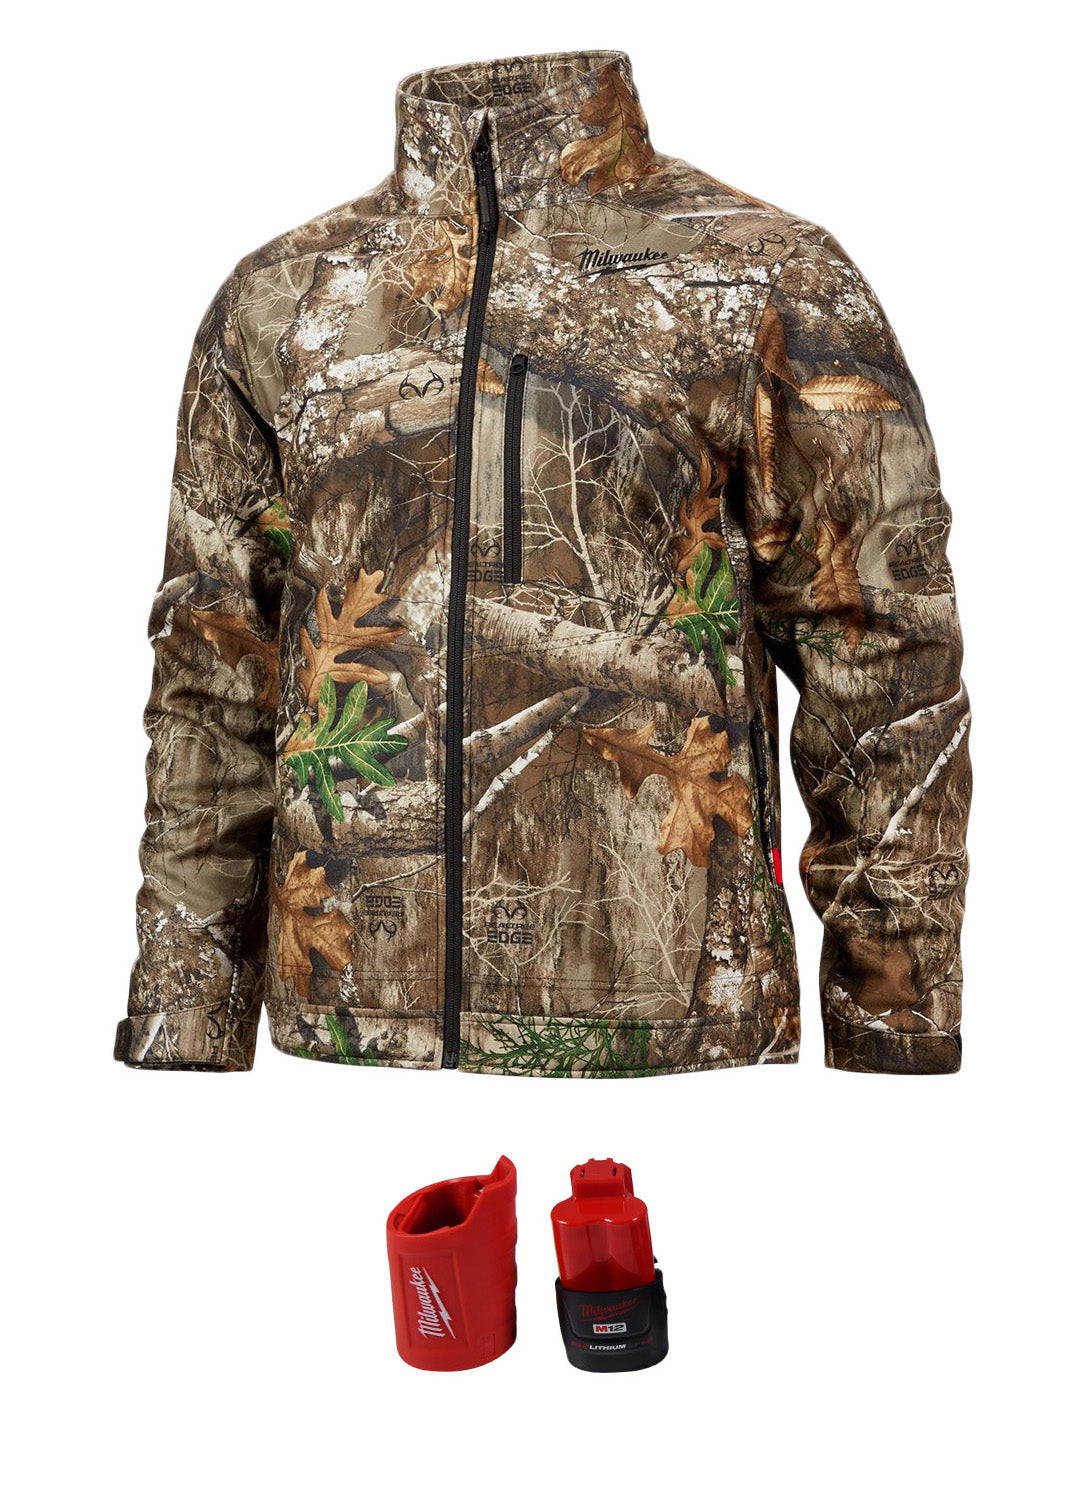 Milwaukee-224C-21XL-M12-Lithium-Ion-QUIETSHELL-Camo-Heated-Jacket-Kit-with-Battery-XL-image-1